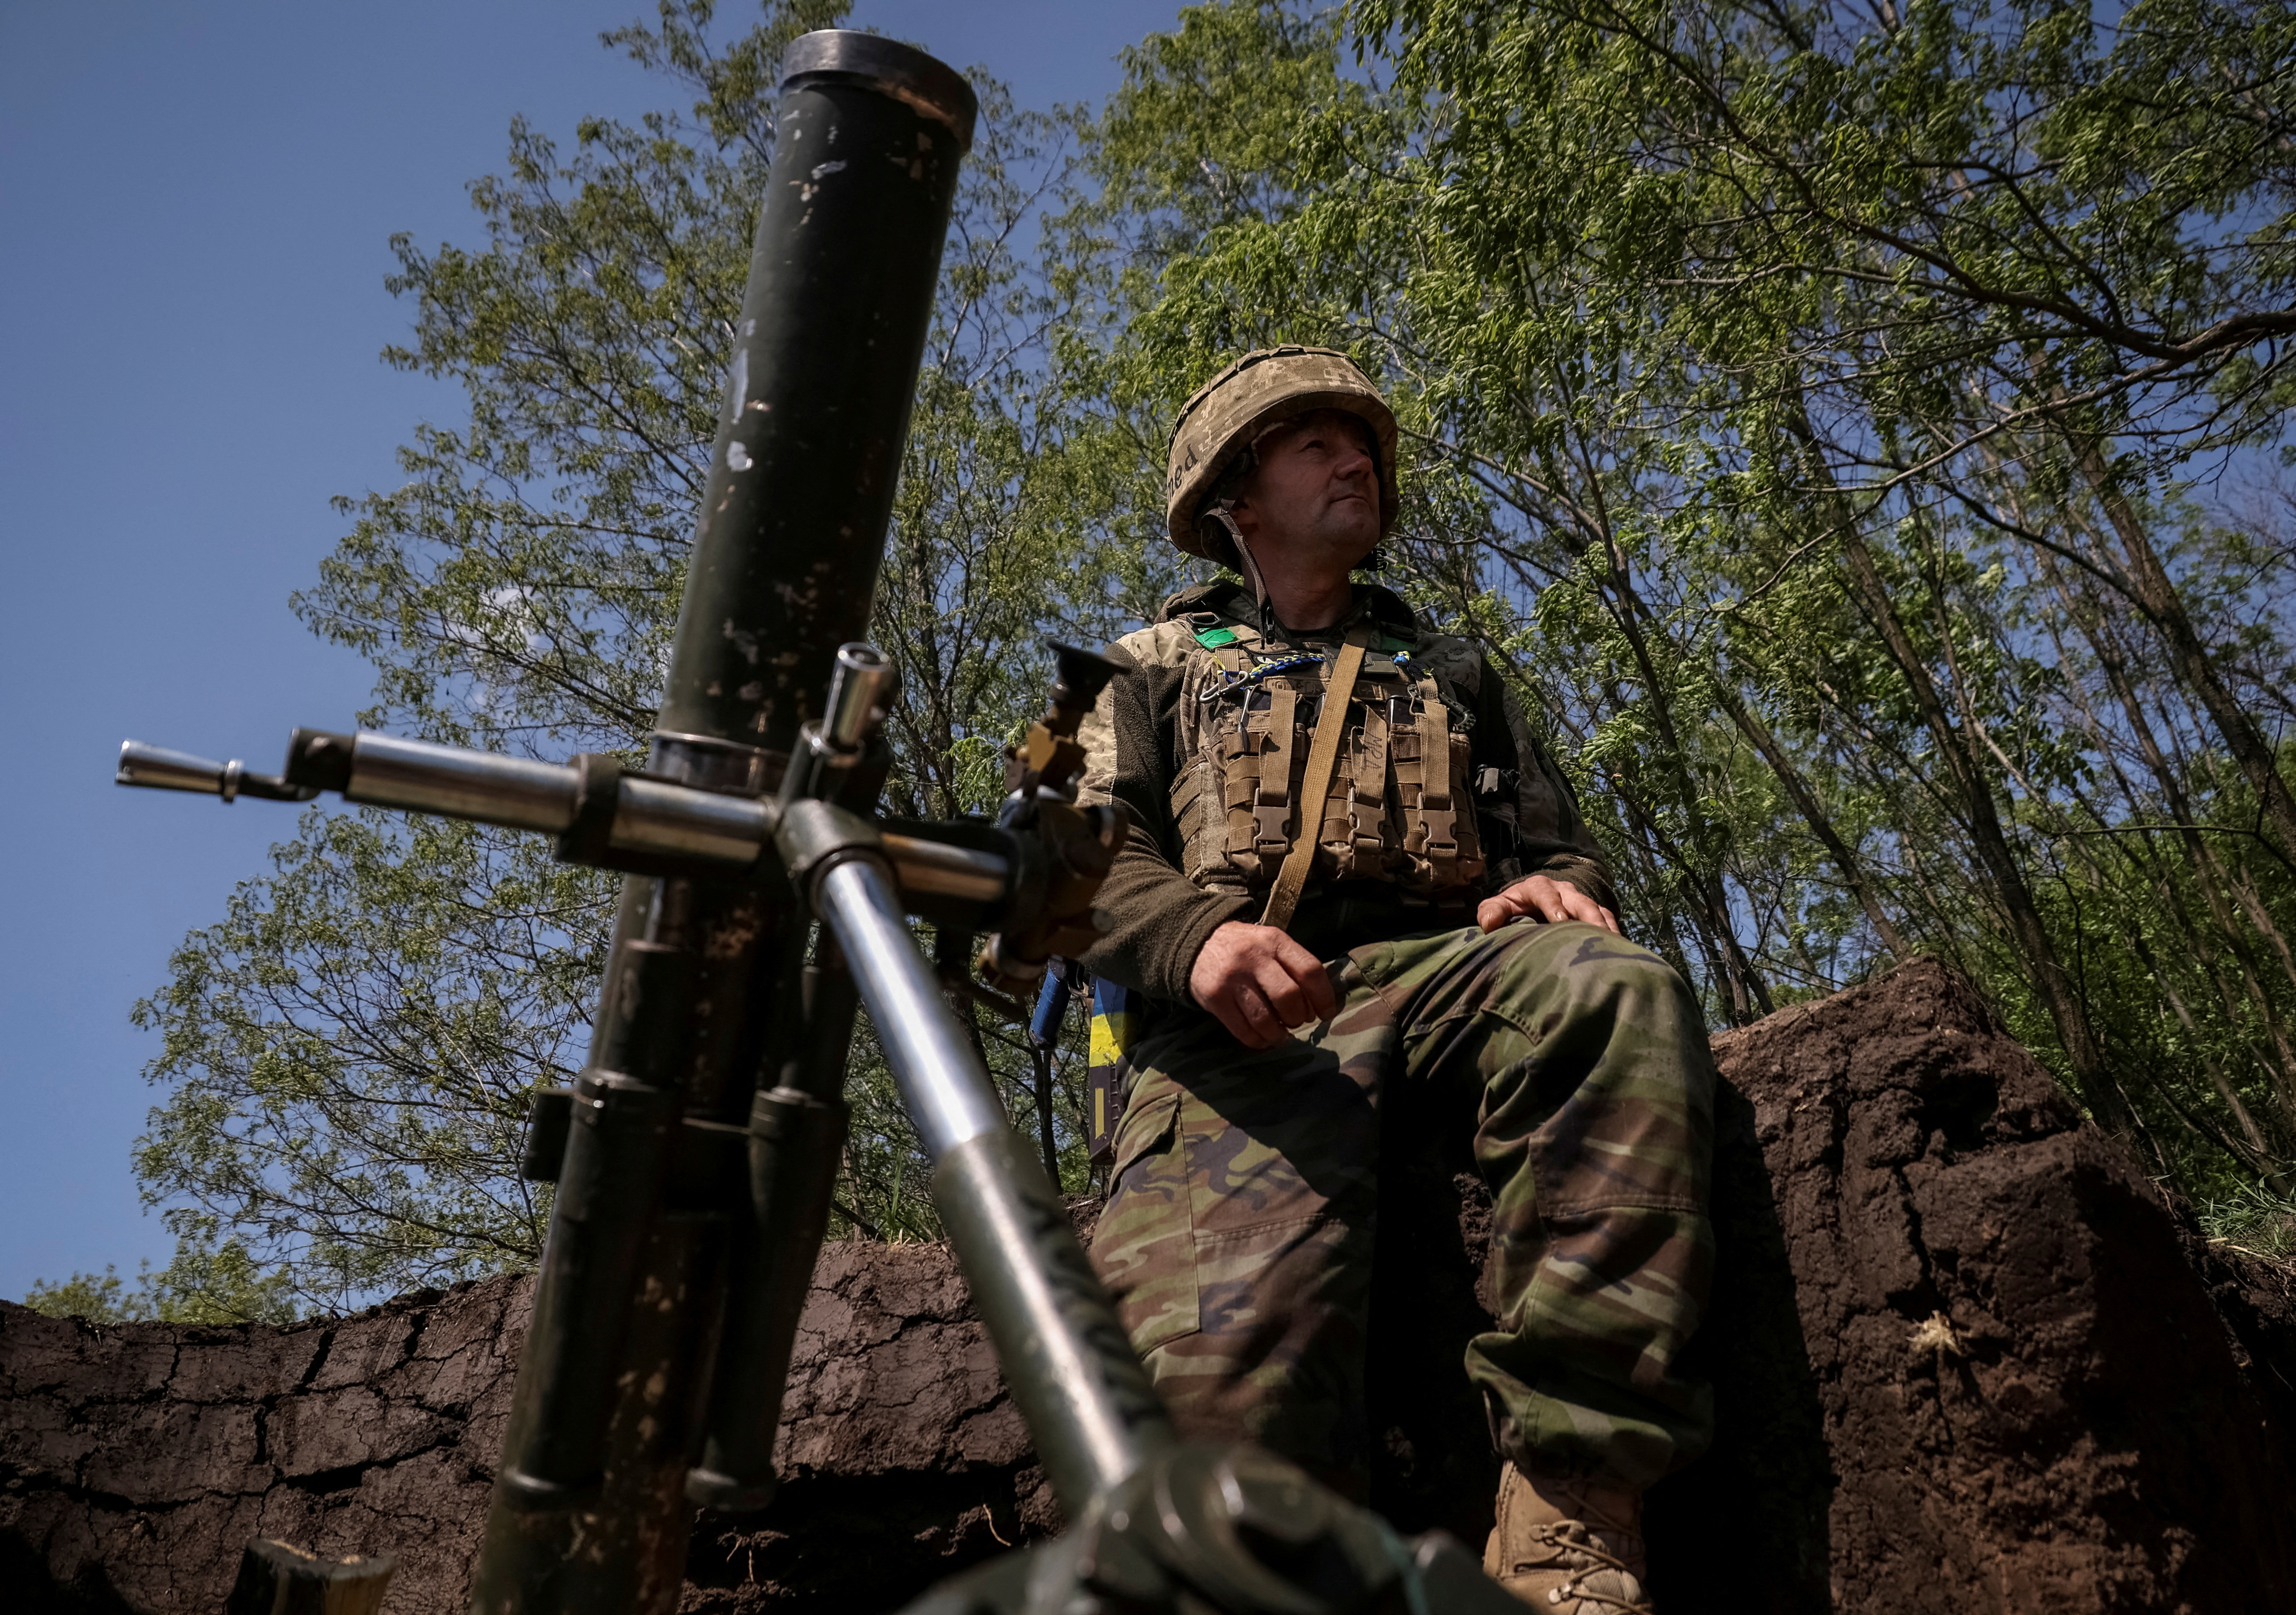 A Ukrainian service member prepares to fire a mortar at a front line near the city of Bakhmut